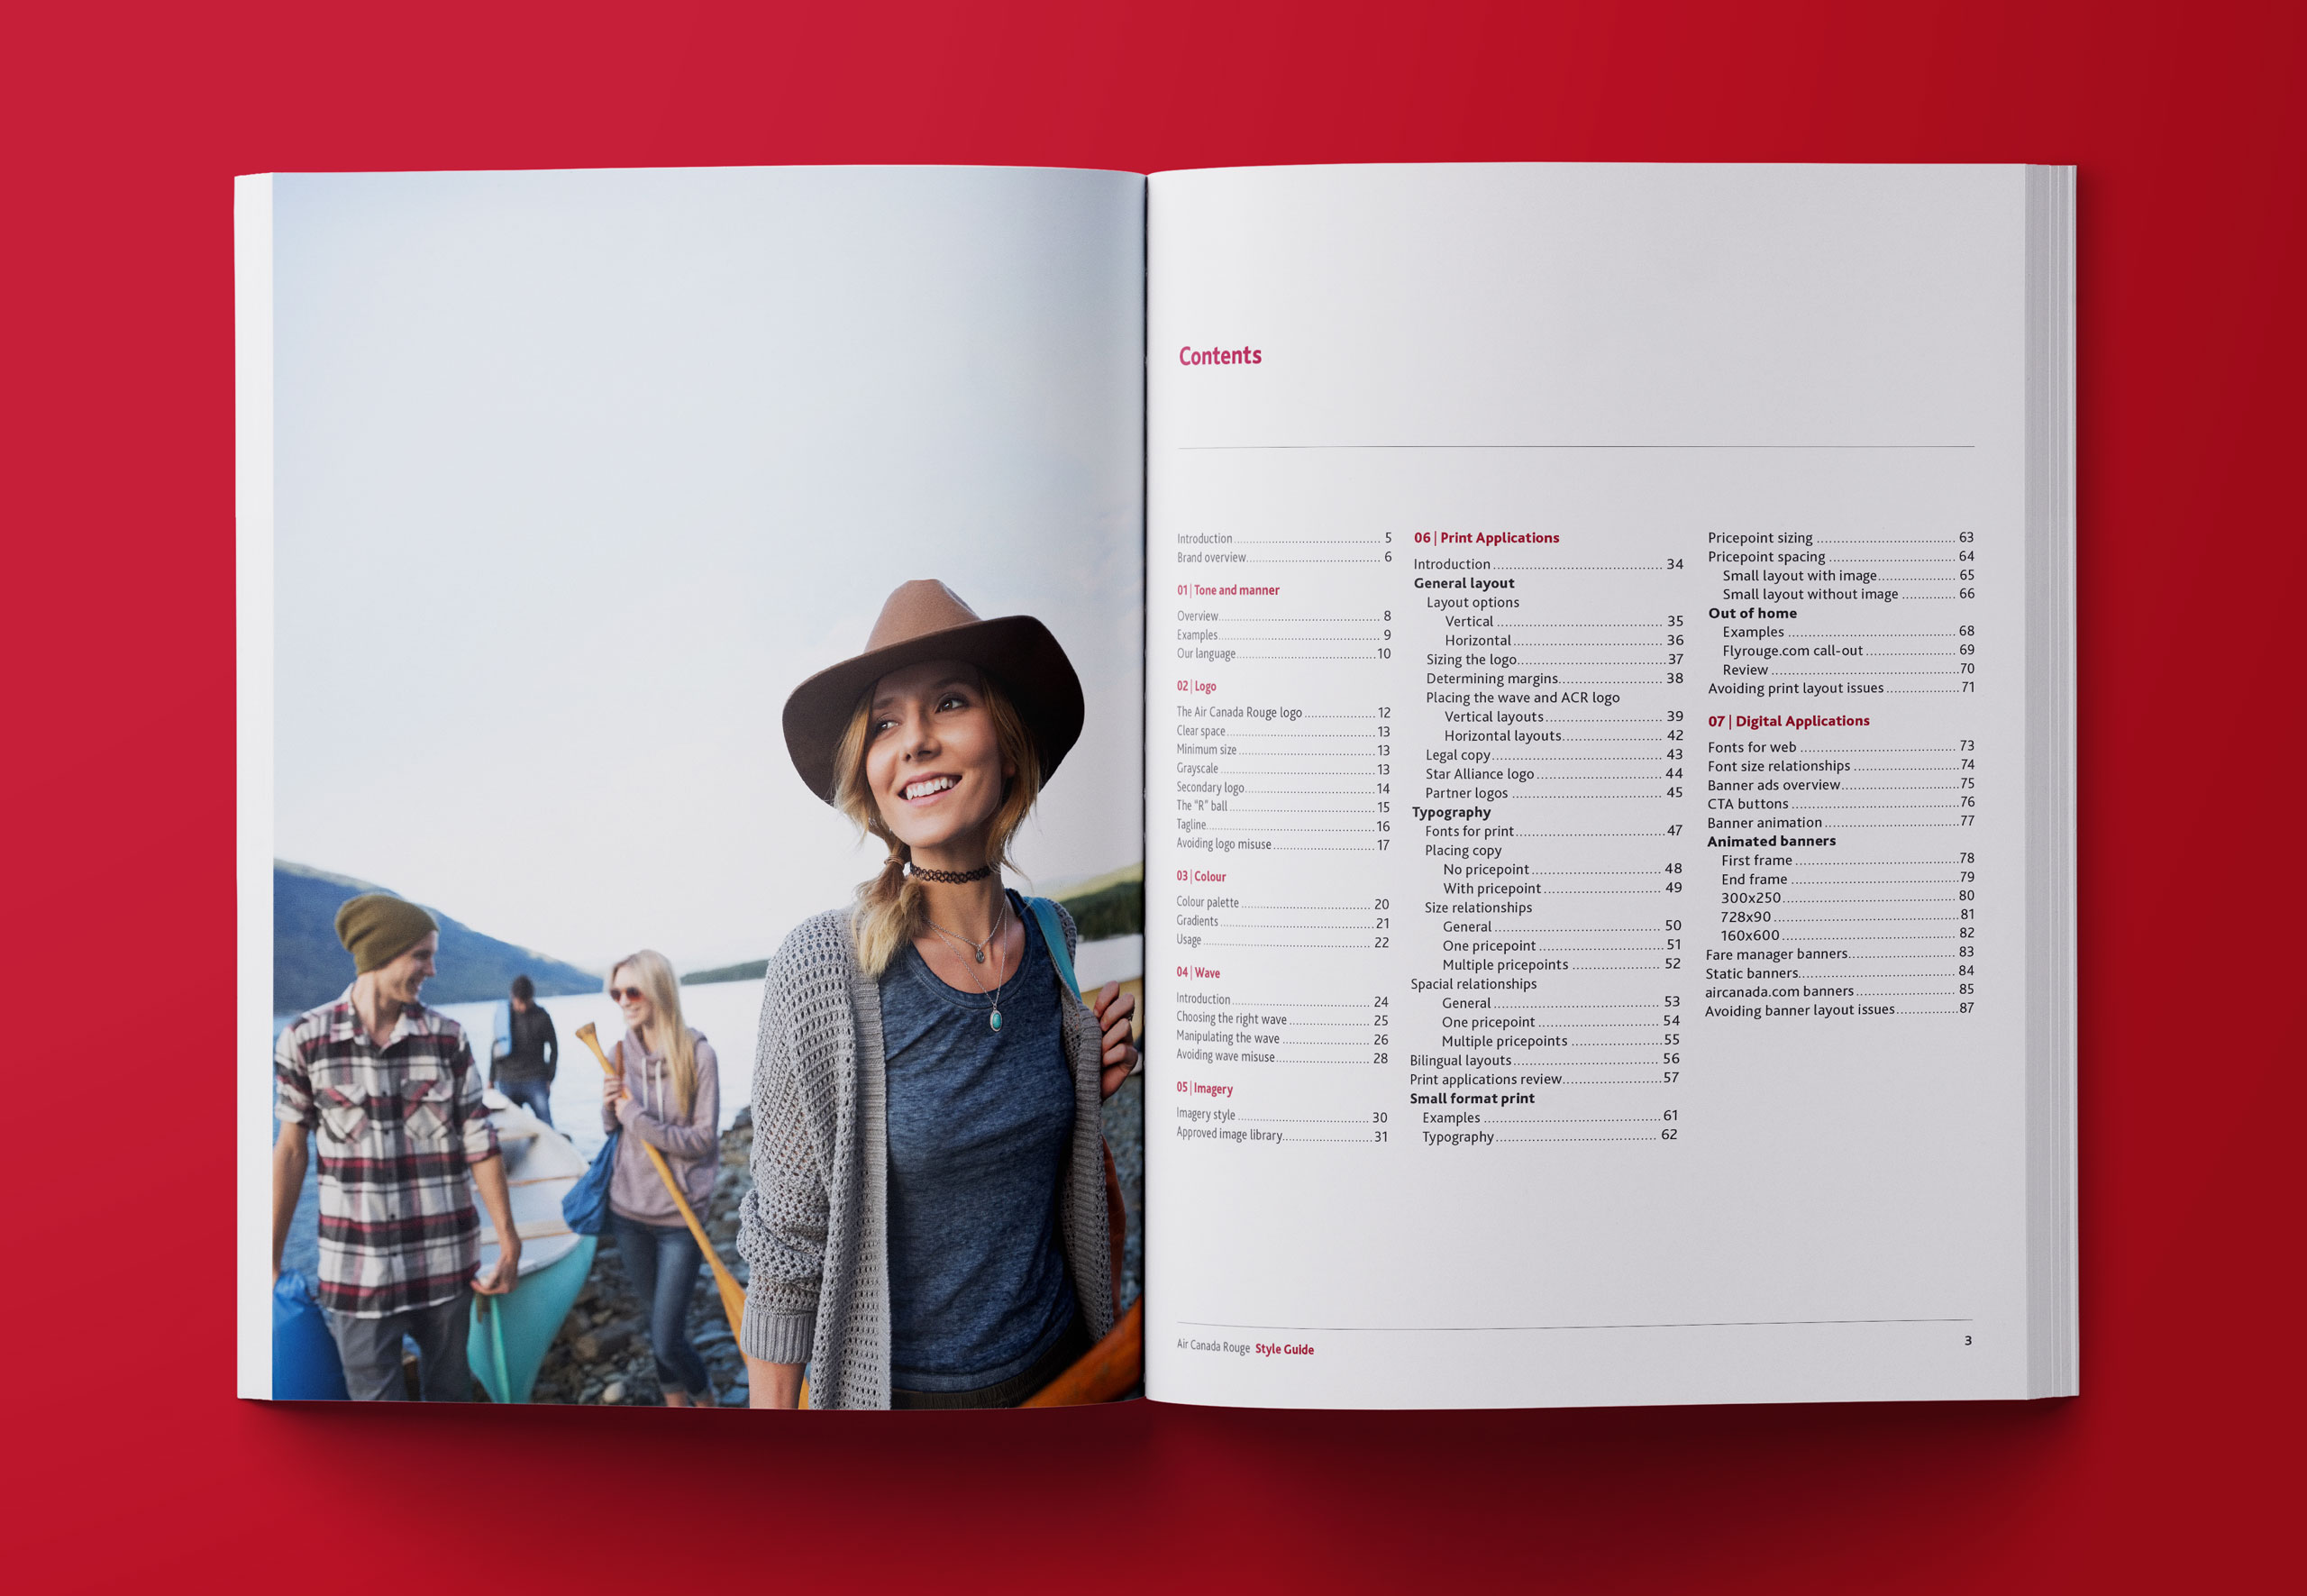 Book spread with a large image of a smiling woman by a lake on the left page and a table of contents on the right